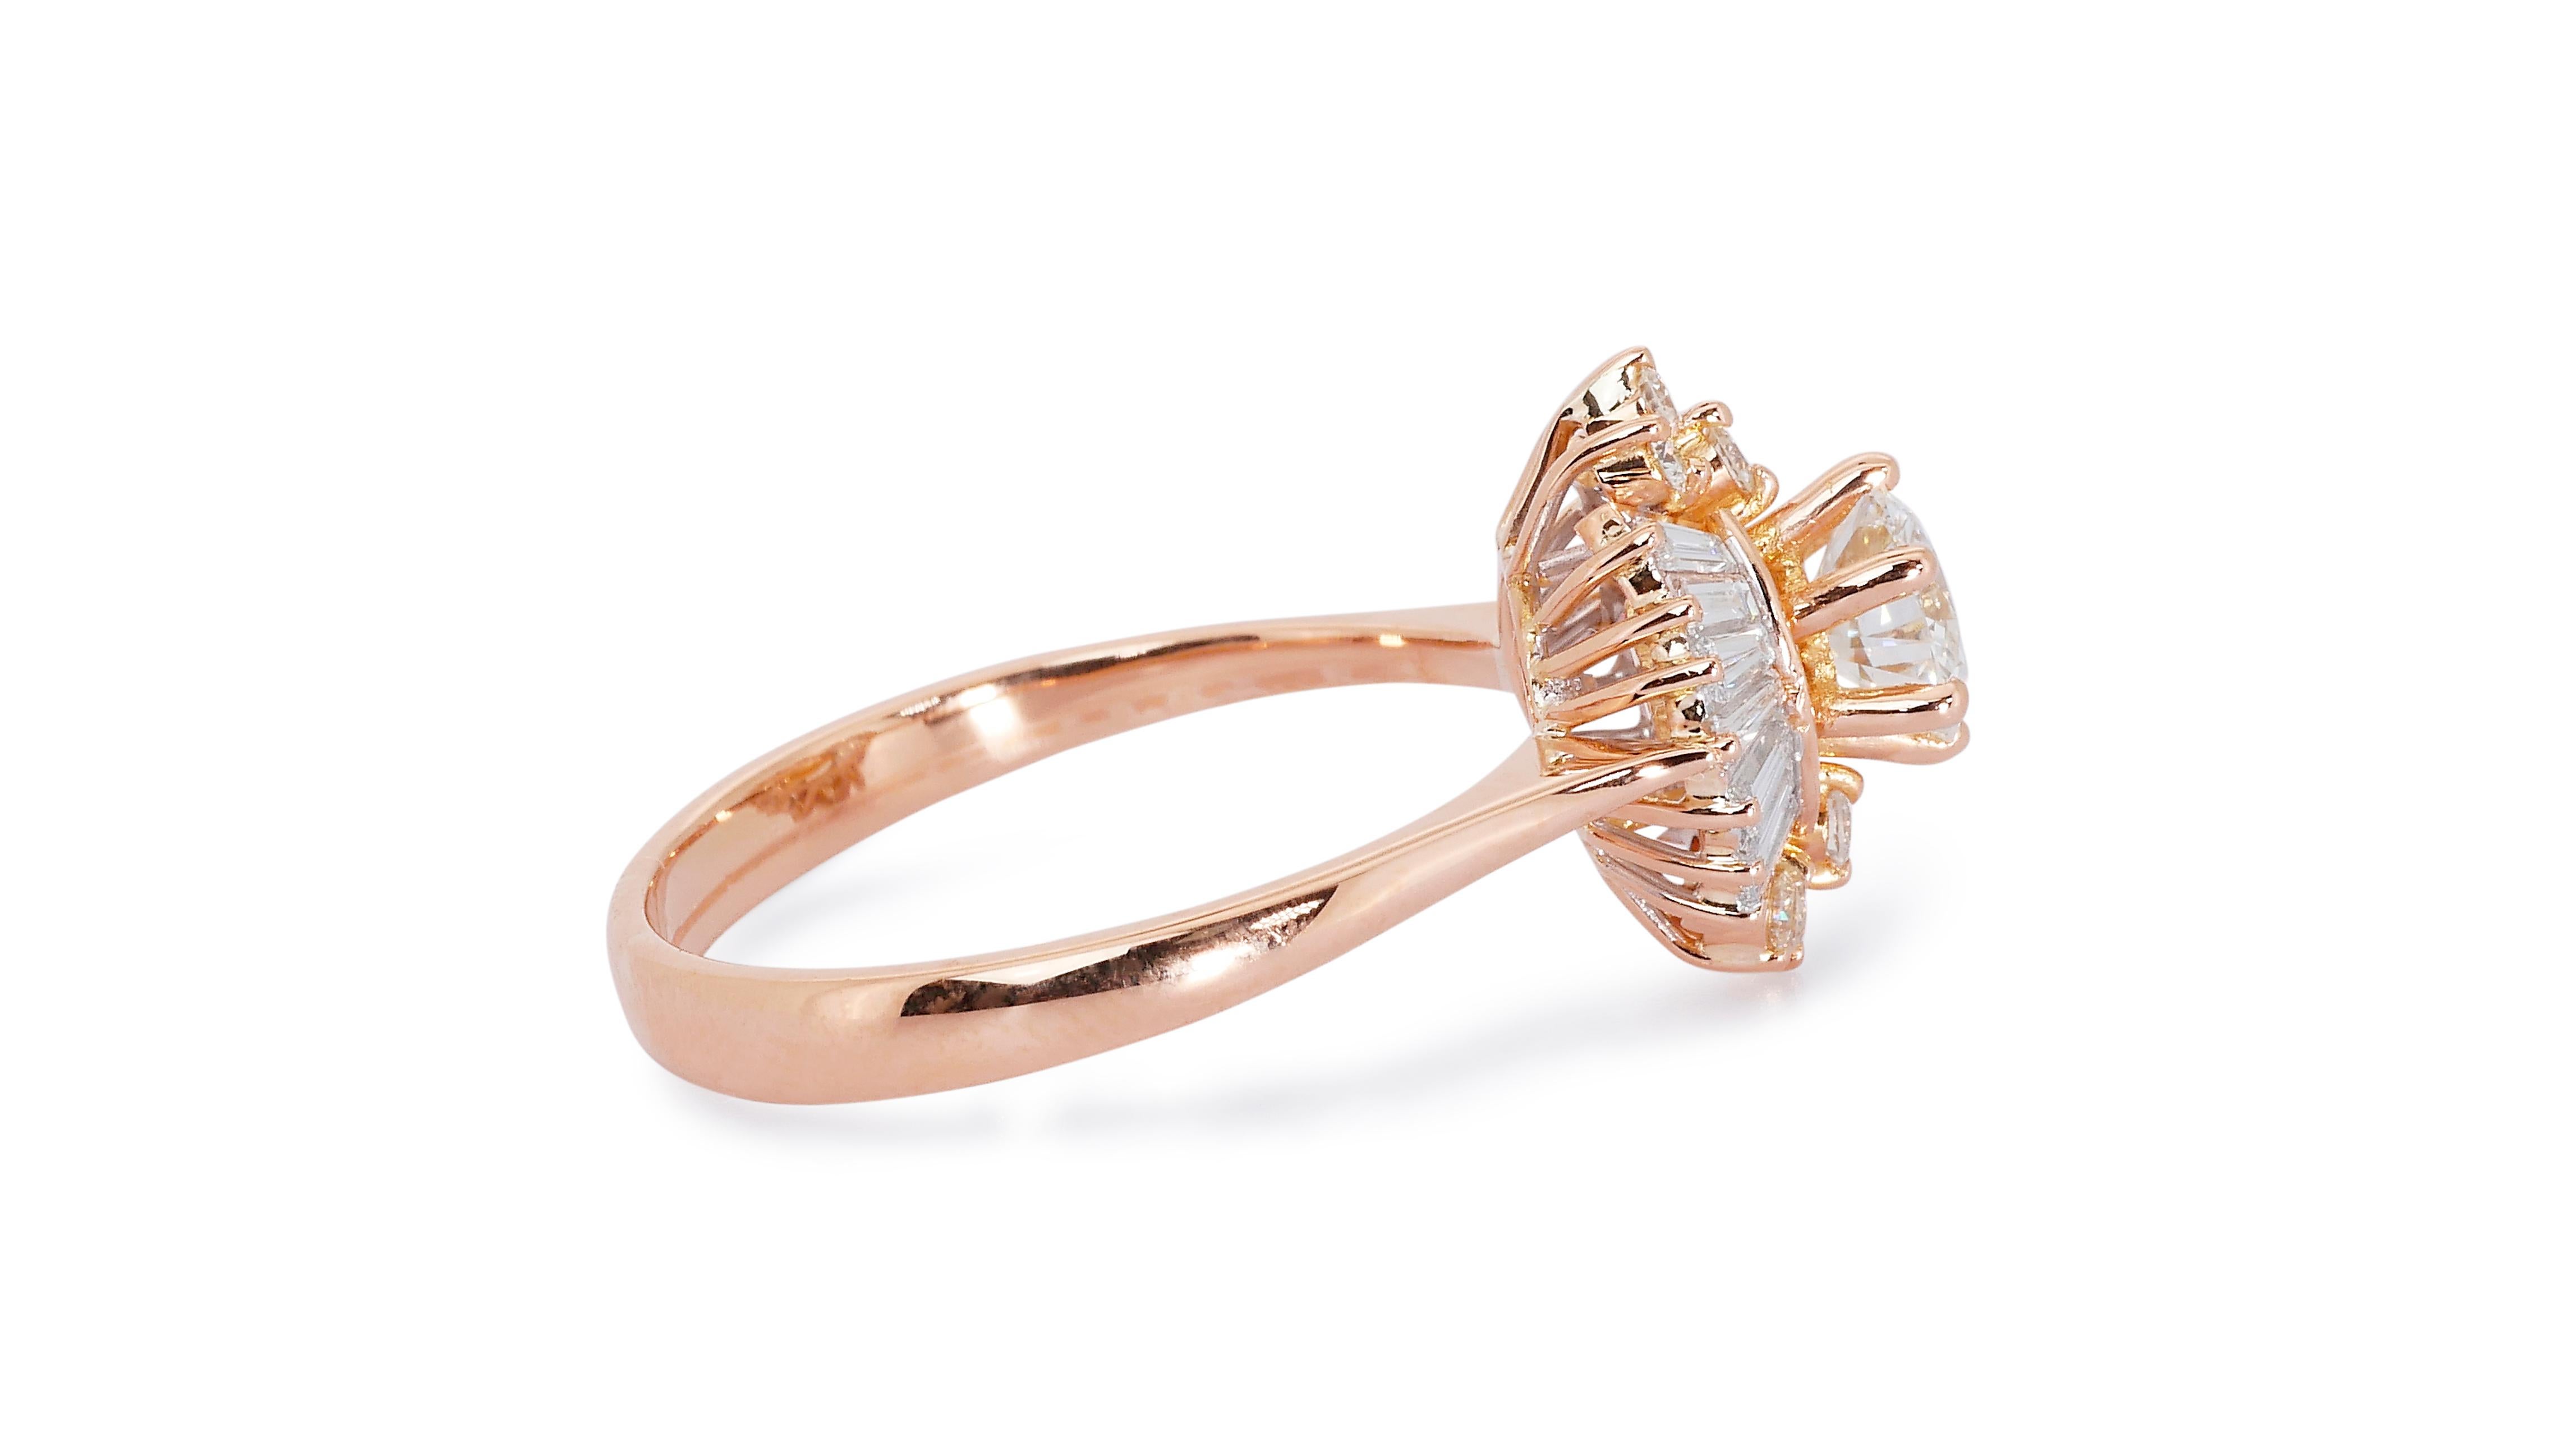 Marvelous 14k Rose Gold Ring w/ 1.46 Carat Natural Diamonds GIA Certificate For Sale 1